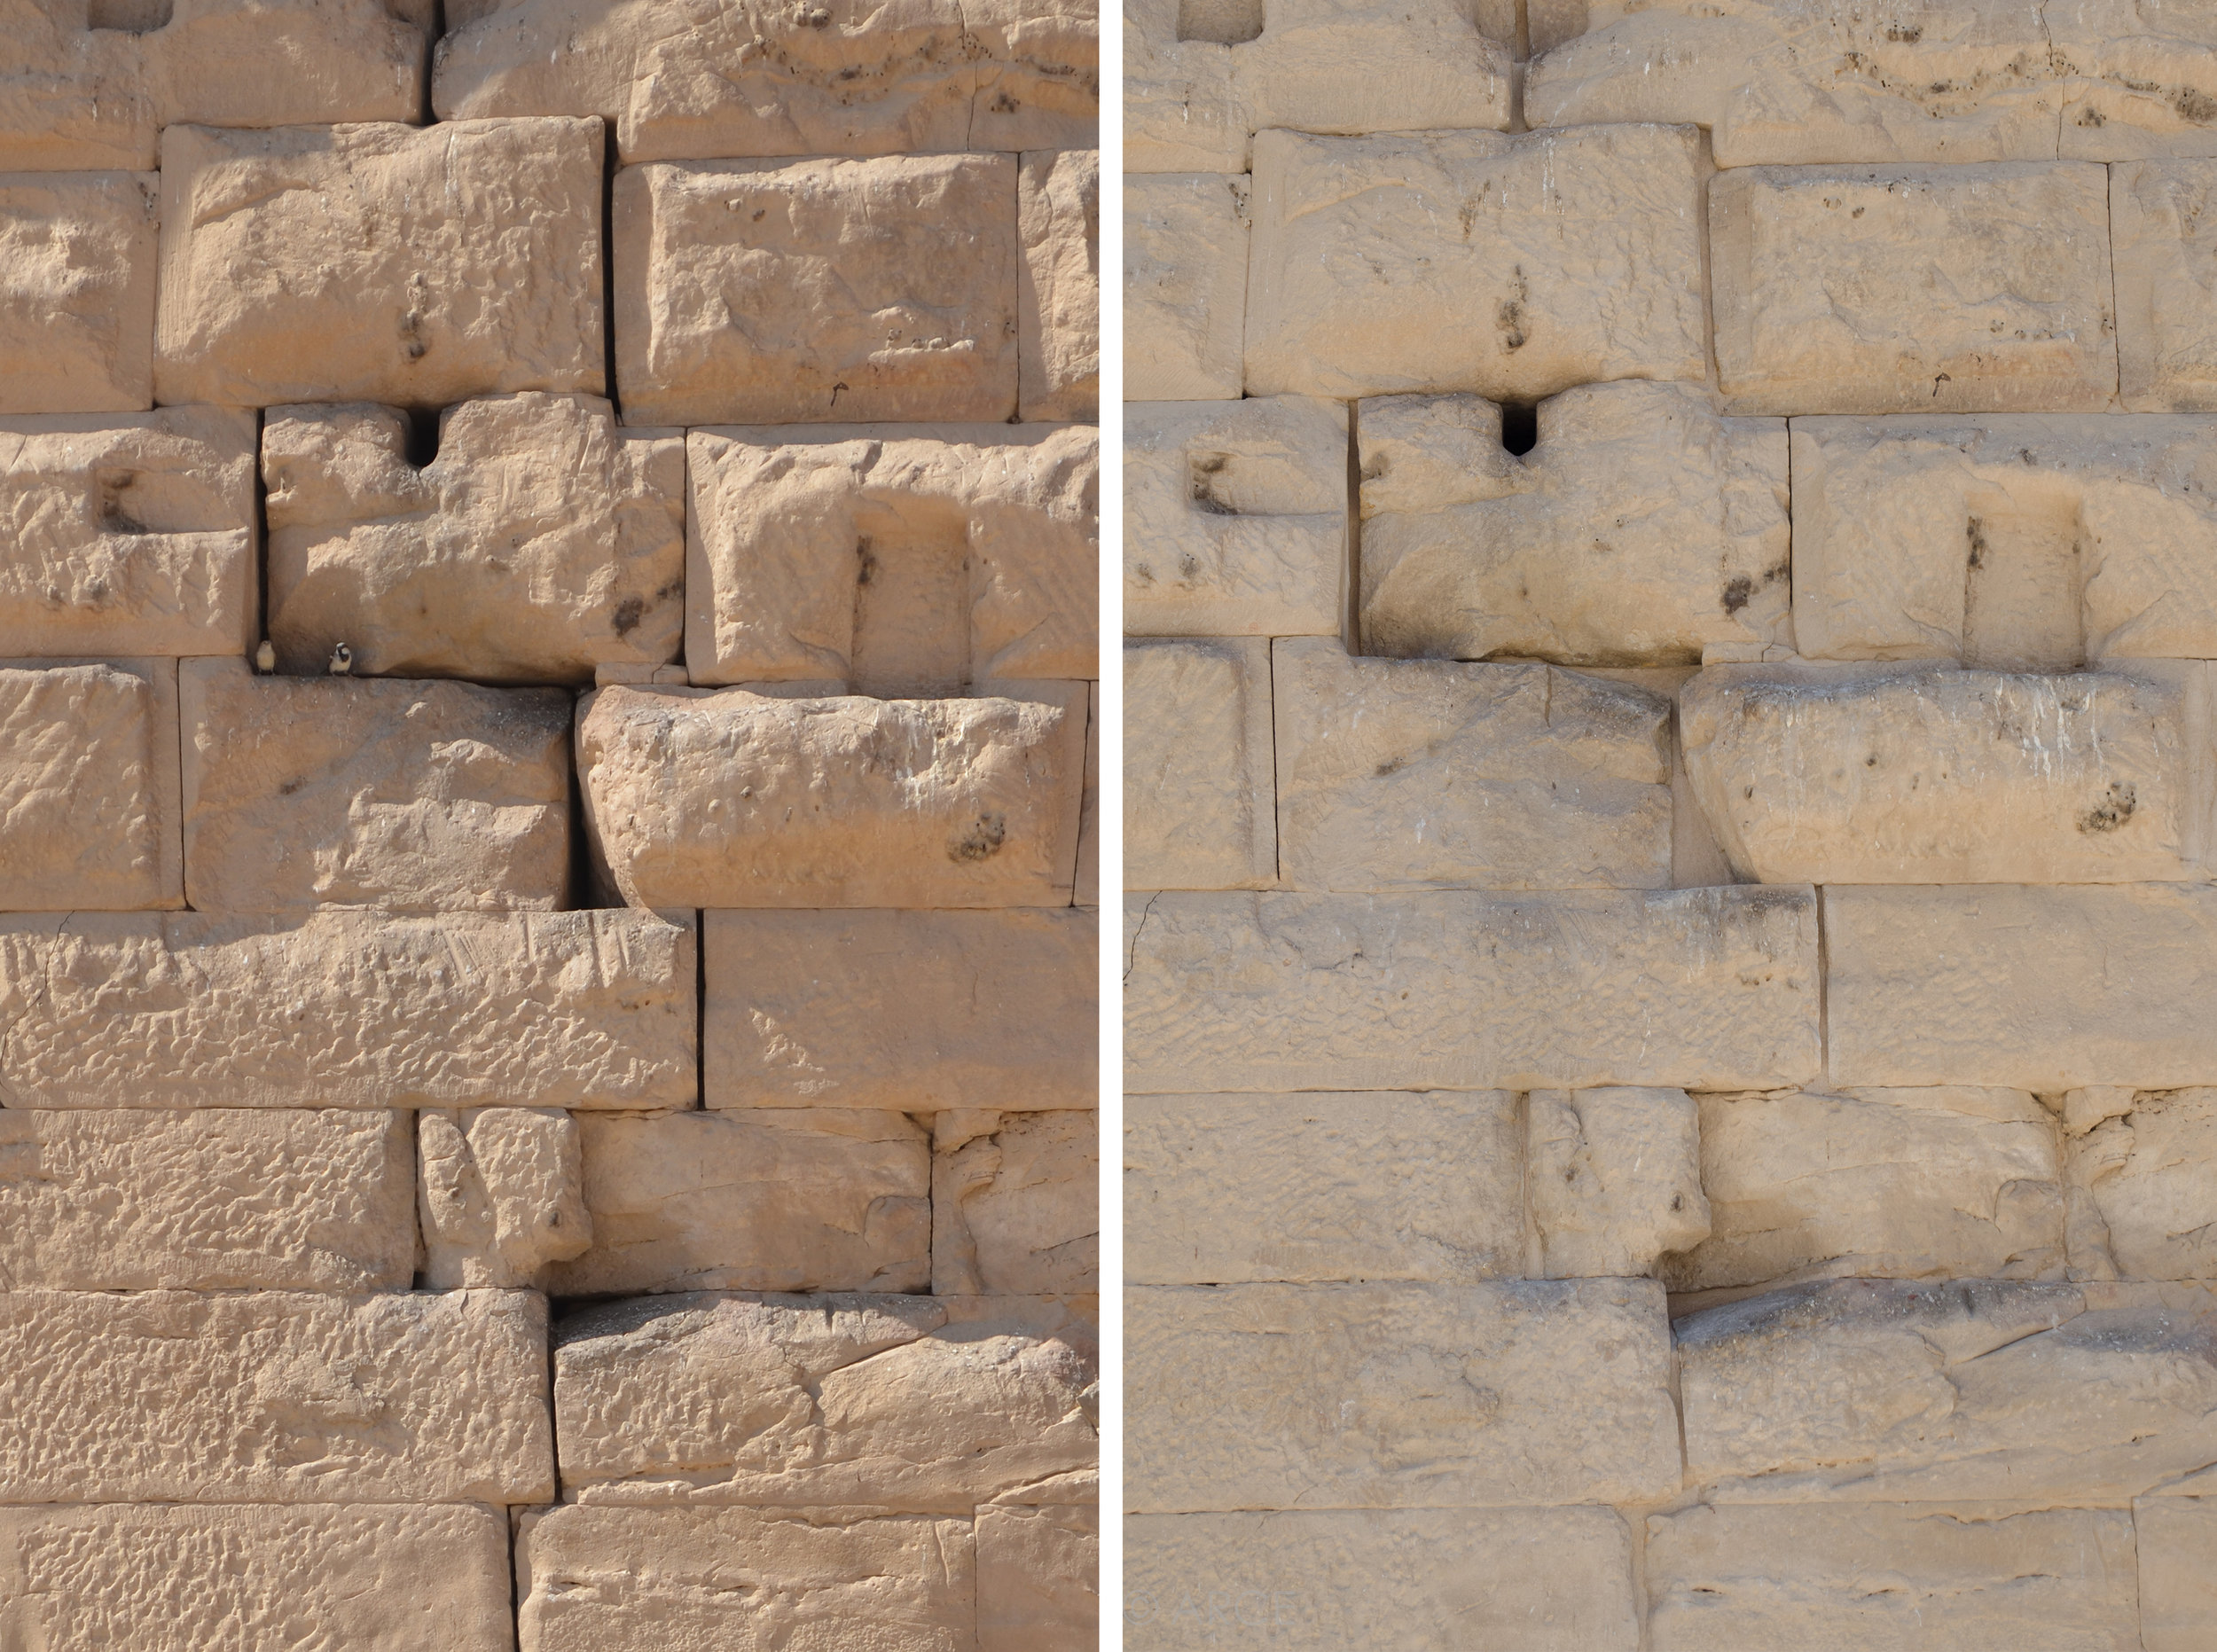  Detail of a large crack in the north facade before (left) and after (right) repointing.&nbsp;  Image © ARCE, 2012 